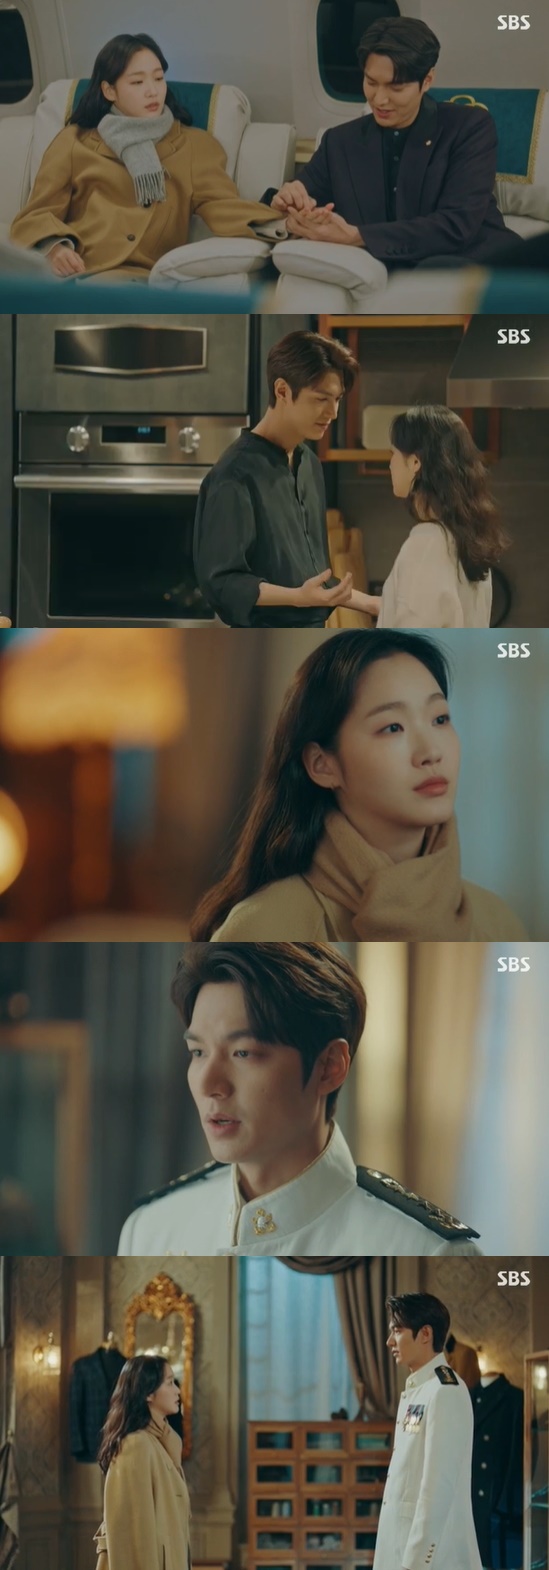 The King Lee Min-ho came to Kim Go-eun to keep his promise after winning over JapanIn the 6th episode of SBSs The King: Eternal Monarch broadcast on the 2nd, Lee Min-ho was portrayed as falling in love with Kim Go-eun.On the same day, when Jeong Tae-eul was in Seoul, he turned the helicopter to Seoul and Koo Seo-ryeong (Jung Eun-chae) heard that Lee Gons helicopter had landed in an emergency, and he saw Jung Tae-eul.Lee laughed as if he was lovely when he heard what Jung Tae-eul told him, and he felt jealous of the smile he had never seen.On the way back to the palace, I tried to ask Leeon about the moon.But when Cho Young (Woo Do-hwan) and Mo secretary (Baek Hyun-joo) looked at him, he said he would ask him next time, but Leeon wrote in the hand of Jung Tae-eul.Lee cooked directly to Jung Tae-eun, and Jung Tae-eun counted his feelings by saying the feelings he felt while walking around Korean Empire alone.Lee called Jung Tae-eul to his side and put his forehead to his head and said, I want to stroke it, but I do not have a hand.I go to the thrilling behavior of Lee, and I go to the station, saying that love is not the first time.This is my life, and no one has ever come over this, Igon said. I told you to jealous. Then Jung Tae-eun will not win anyway.Whoever it is, it will be this World person. He then took out his ID card and said, I could not get it out because I would give it to you.But what if you are going farther than your World? Jung Tae-eul said his ID card was right and said, But you were here for 25 years? Igon said he thought he could meet him someday after he had leaked his ID card.Hes going to start or end everything. Its a difficult problem, but its a beautiful thing. Youre the answer Im looking for.Whoever it is, you won, so dont say goodbye to yourself, he said.Then Japan invaded the Korean Empire territorial waters, and the NSC was called.Igon, who decided to go directly, promised to Jung Tae-eun, I will come back in honor and go soon.Japan thought he would be in a defensive position to protect Igon, but Igon ordered him to protect the sea of ​​Korean Empire, not himself.Eventually, Japan came down, and Igon was able to go to Jung Tae-eul who returned to South Korea.When I saw Igon waiting in front of the house, Jung Tae-eul ran to Igon, and the two were thrilled. How are you? Did you wait?On the other hand, Lee heard the truth about Lee Lim (Lee Jung-jin)s death through Lee Jong-in (Jeon Mu-song).Jung Tae also realized that in South Korea, Egon and others other than himself knew about the existence of the Korean Empire.It is noteworthy whether Lee and Jung Tae will be able to overcome the upcoming crisis.Photo = SBS Broadcasting Screen